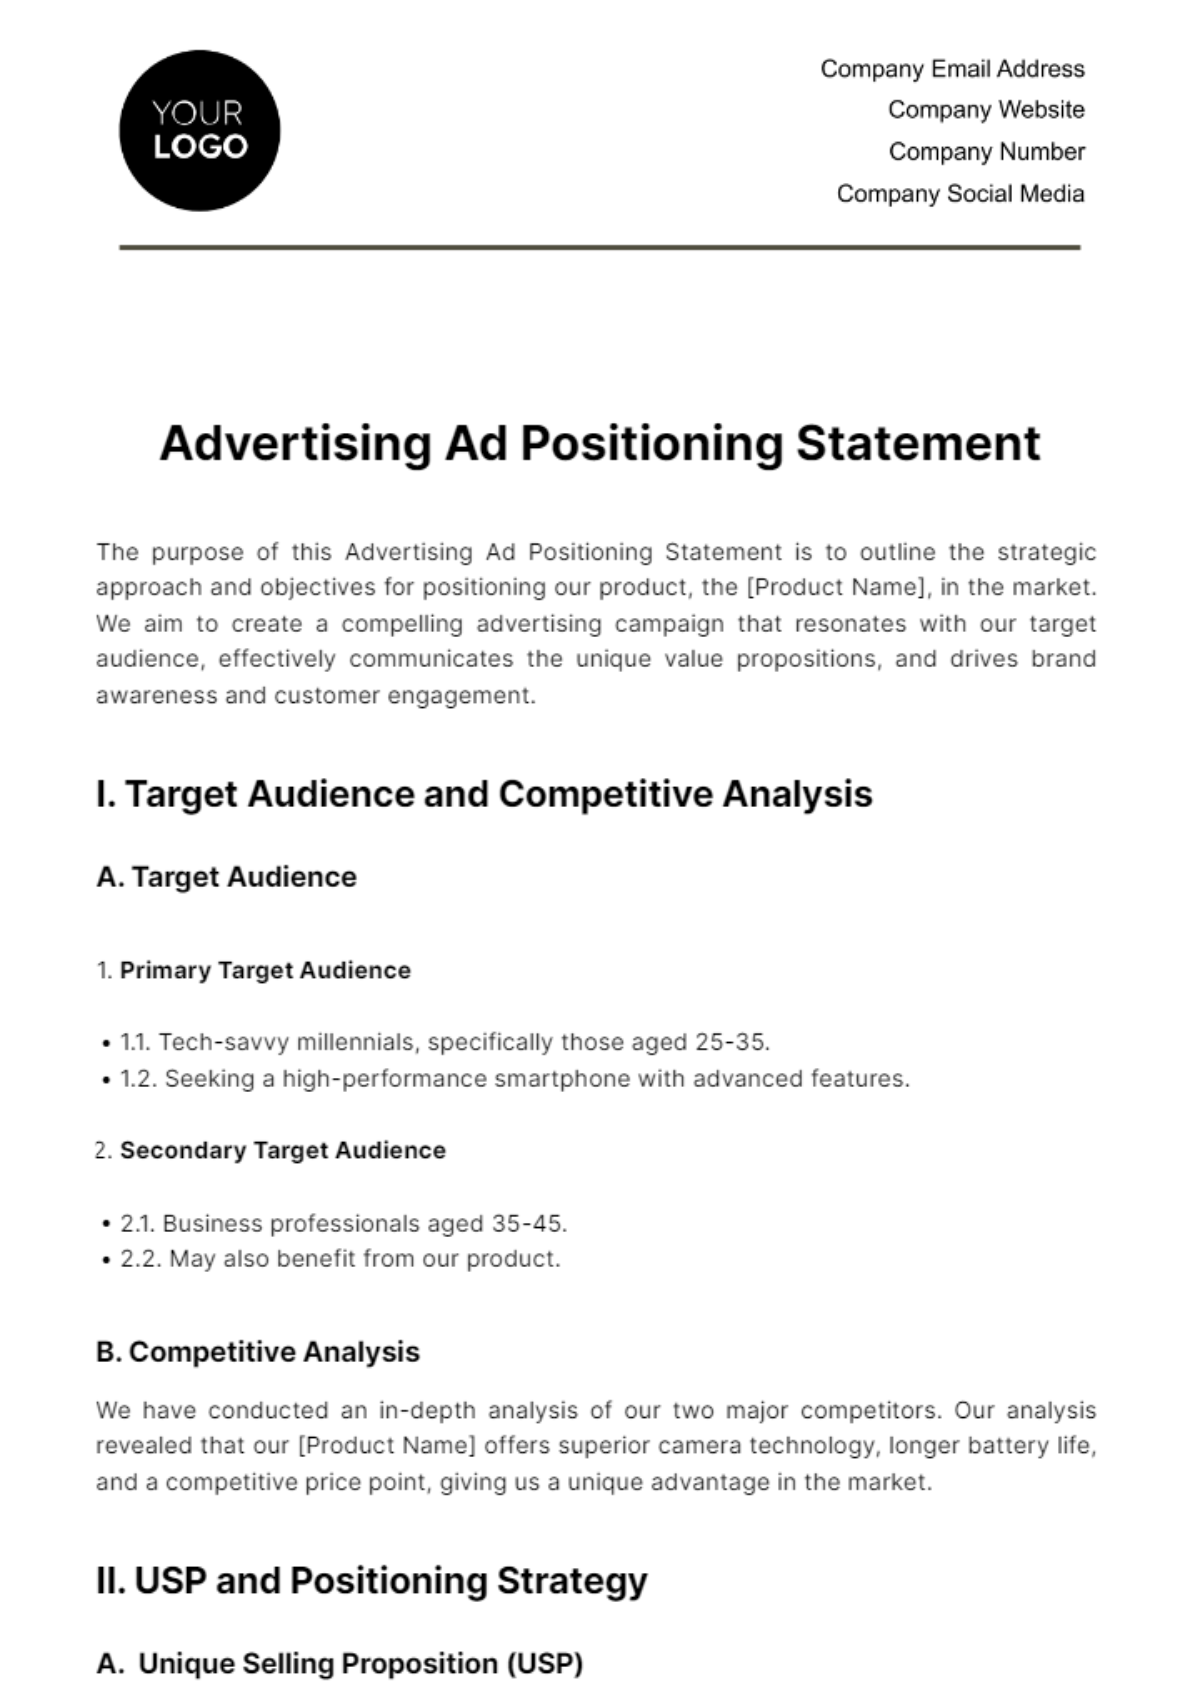 Free Advertising Ad Positioning Statement Template